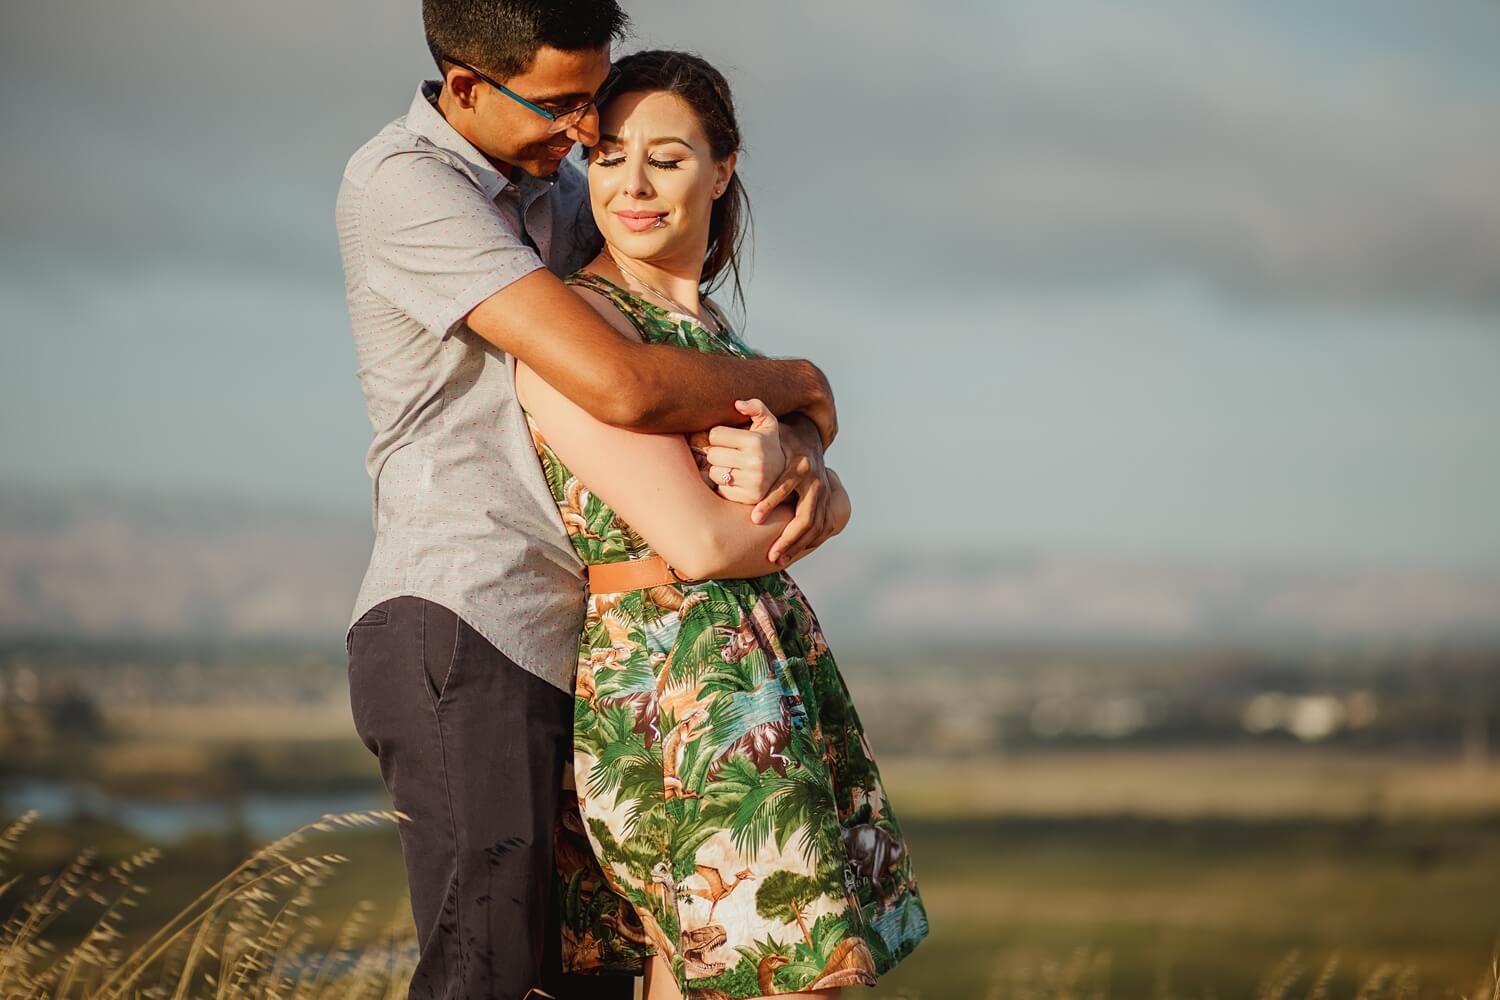 san francisco bay area east bay coyote hills rocks fields bay engagement photography couples portrait session engagement photos natural light affordable wedding photography